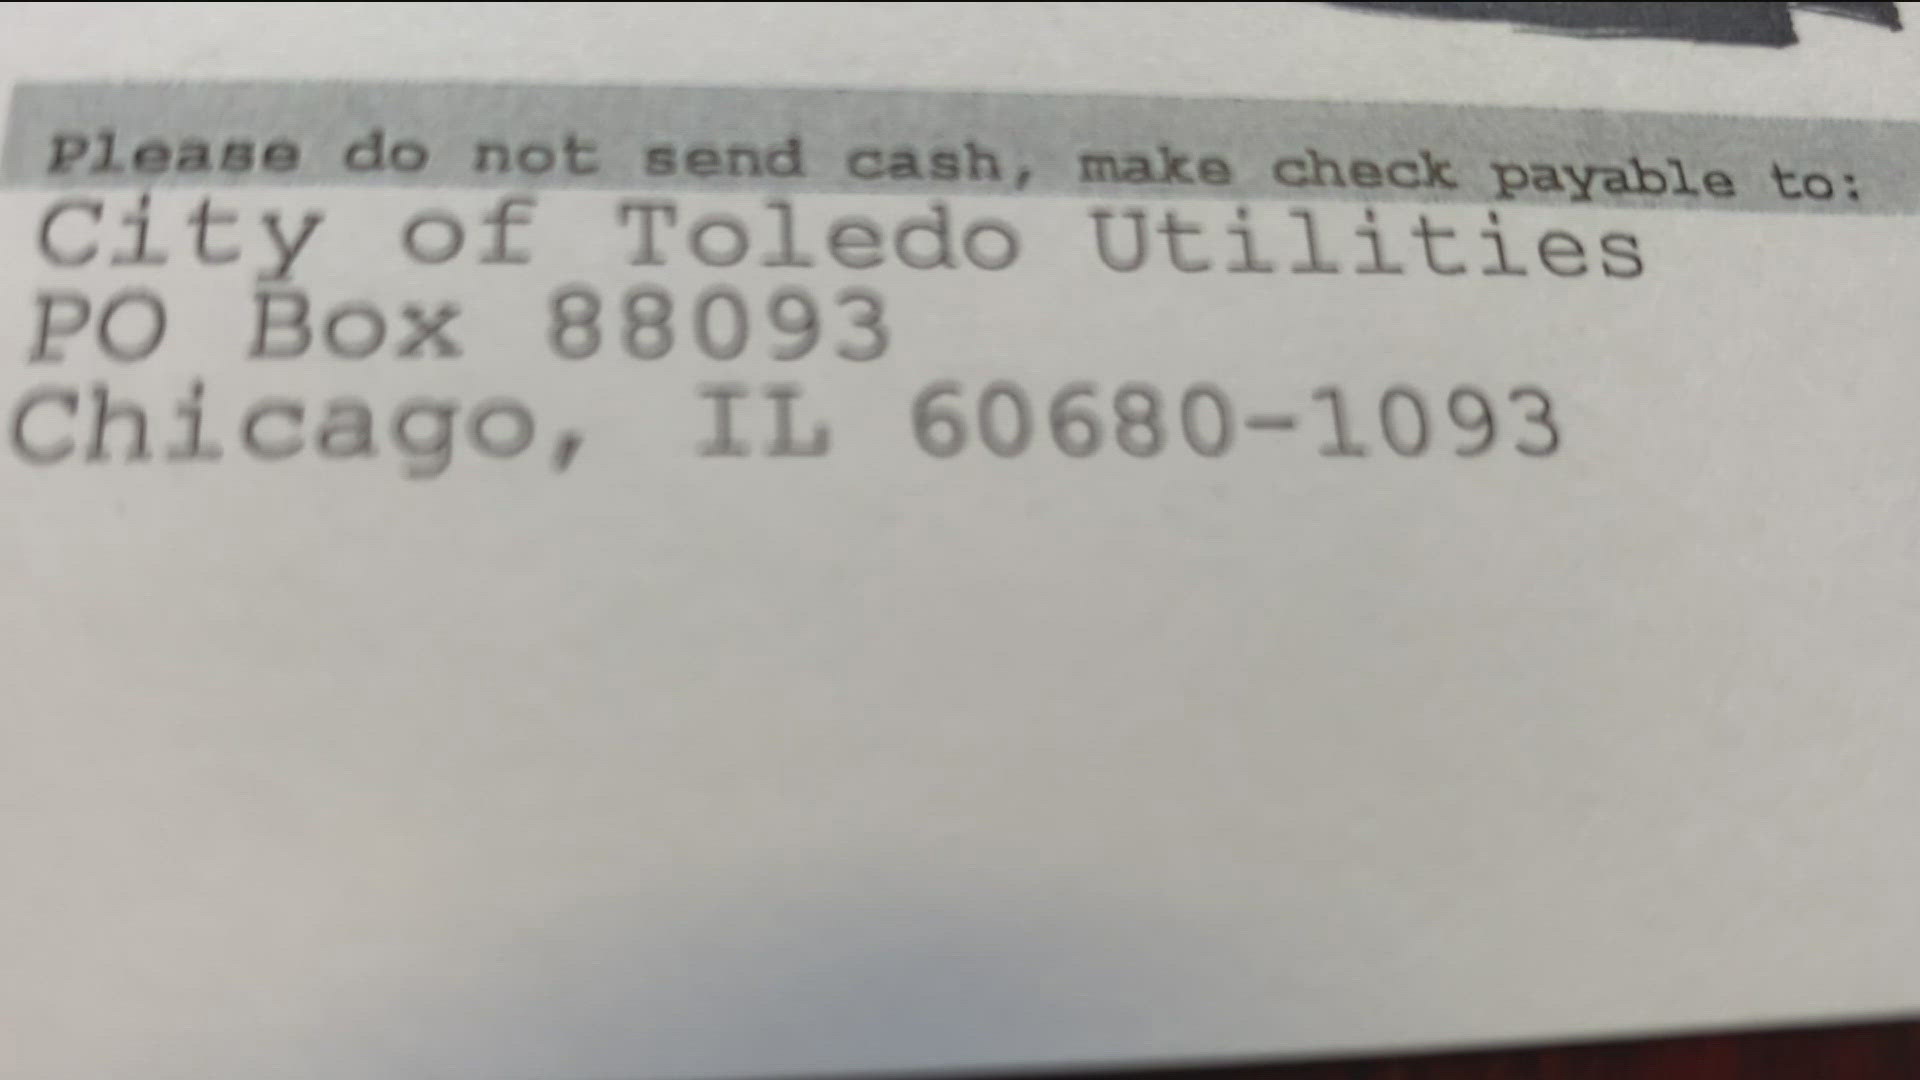 The city of Toledo is asking people to mail water bills to an out-of-state P.O. box. The change has some people wondering why.